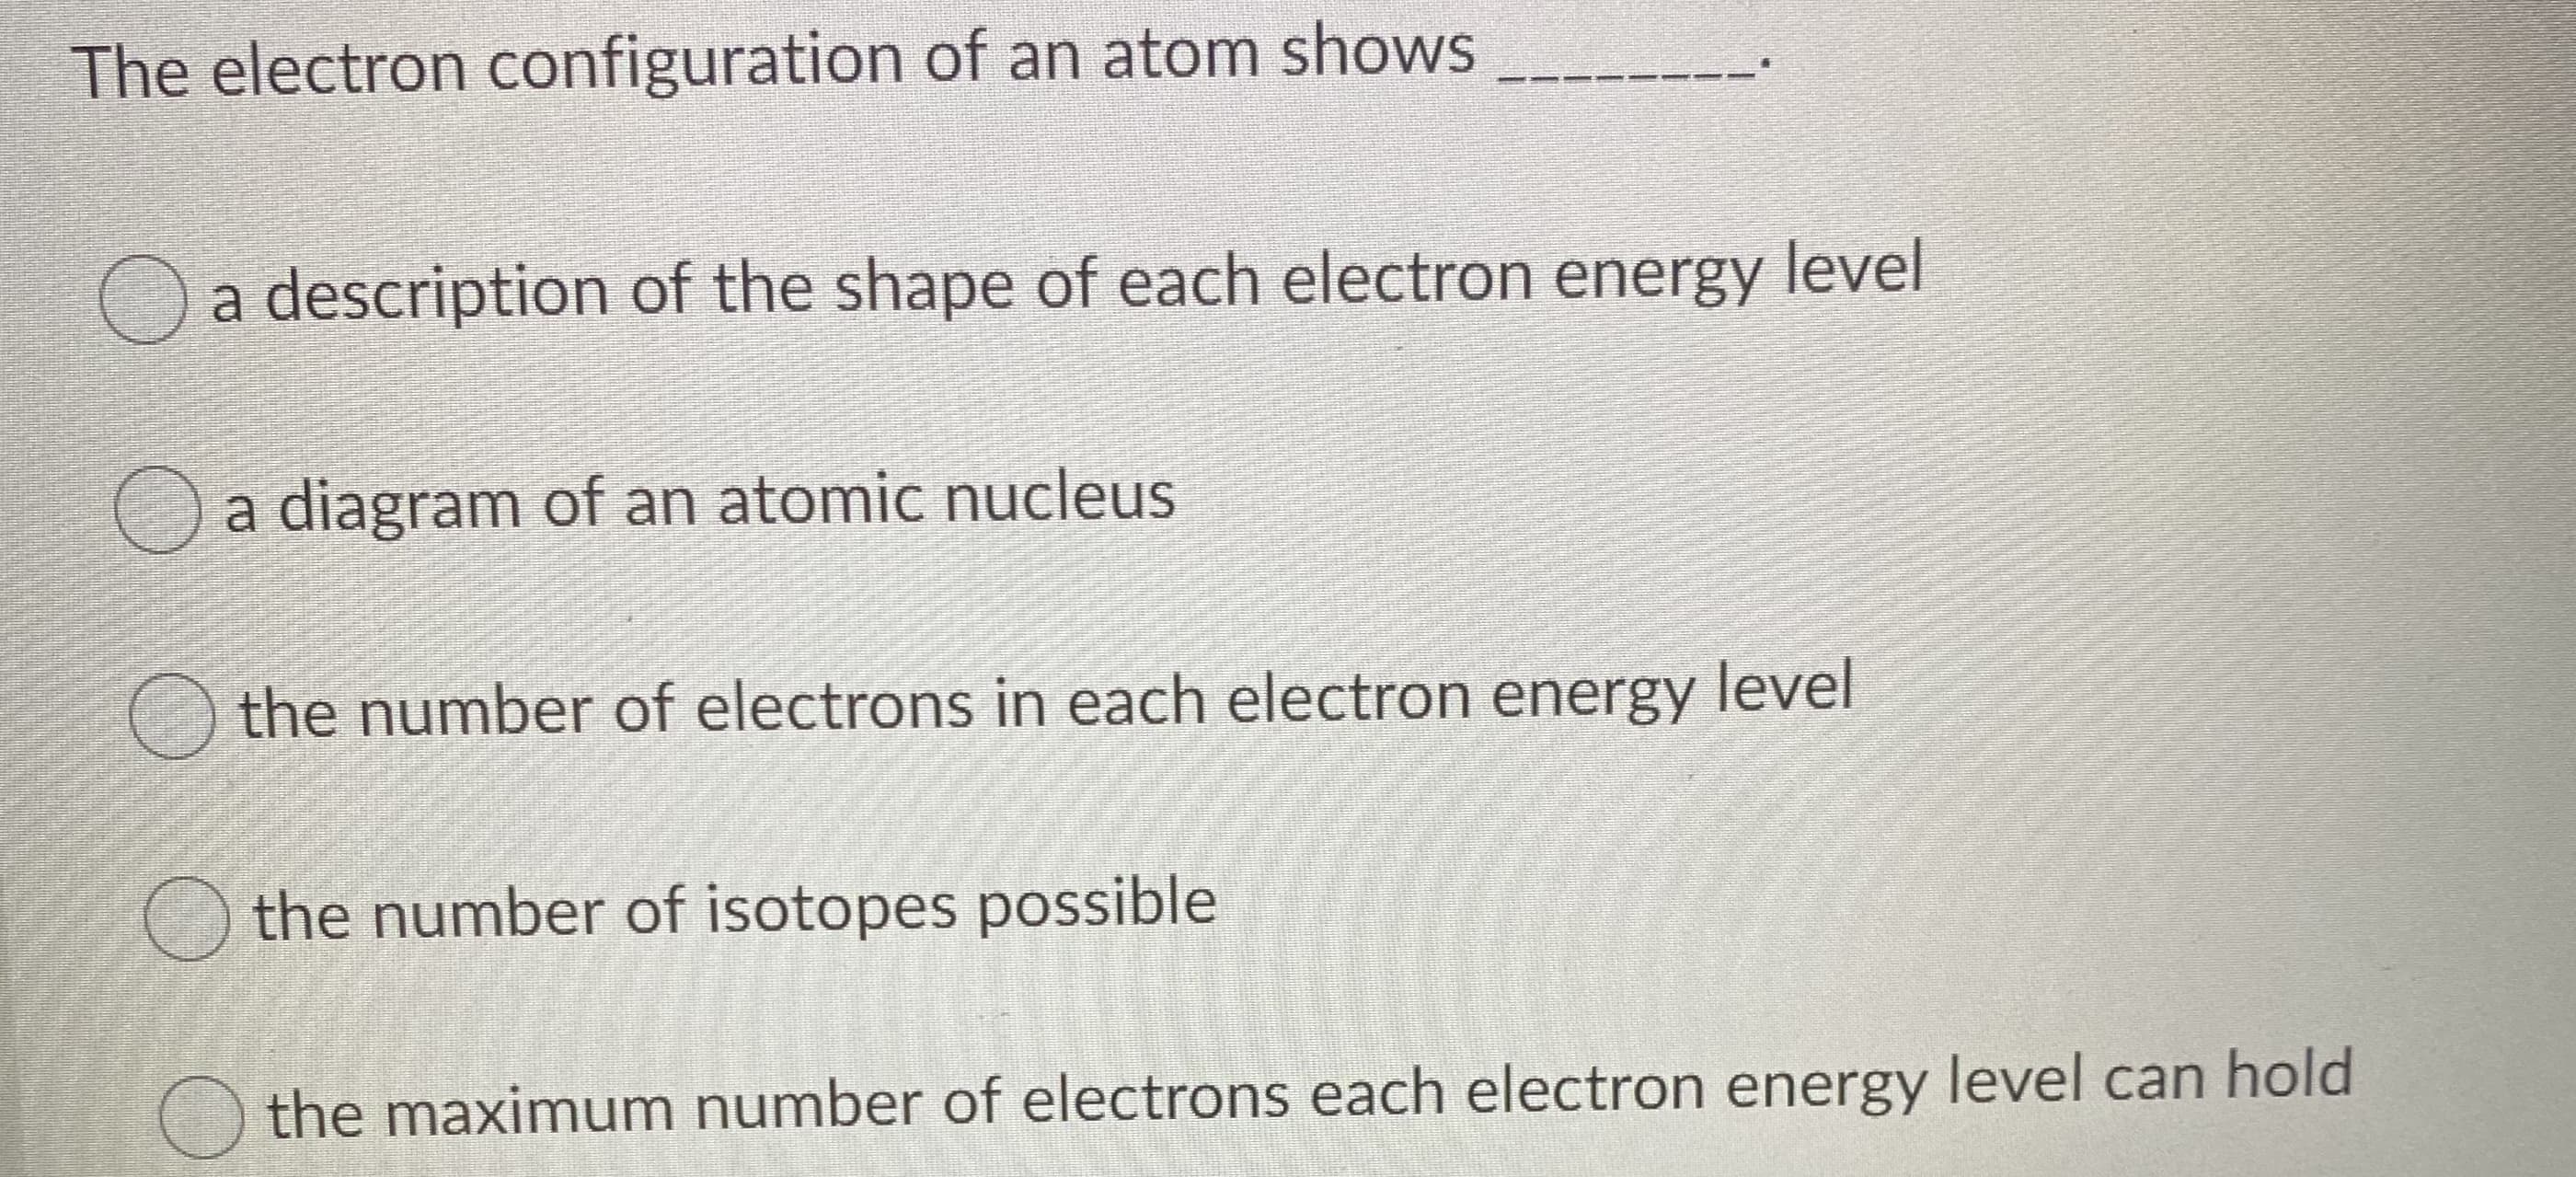 The electron configuration of an atom shows
